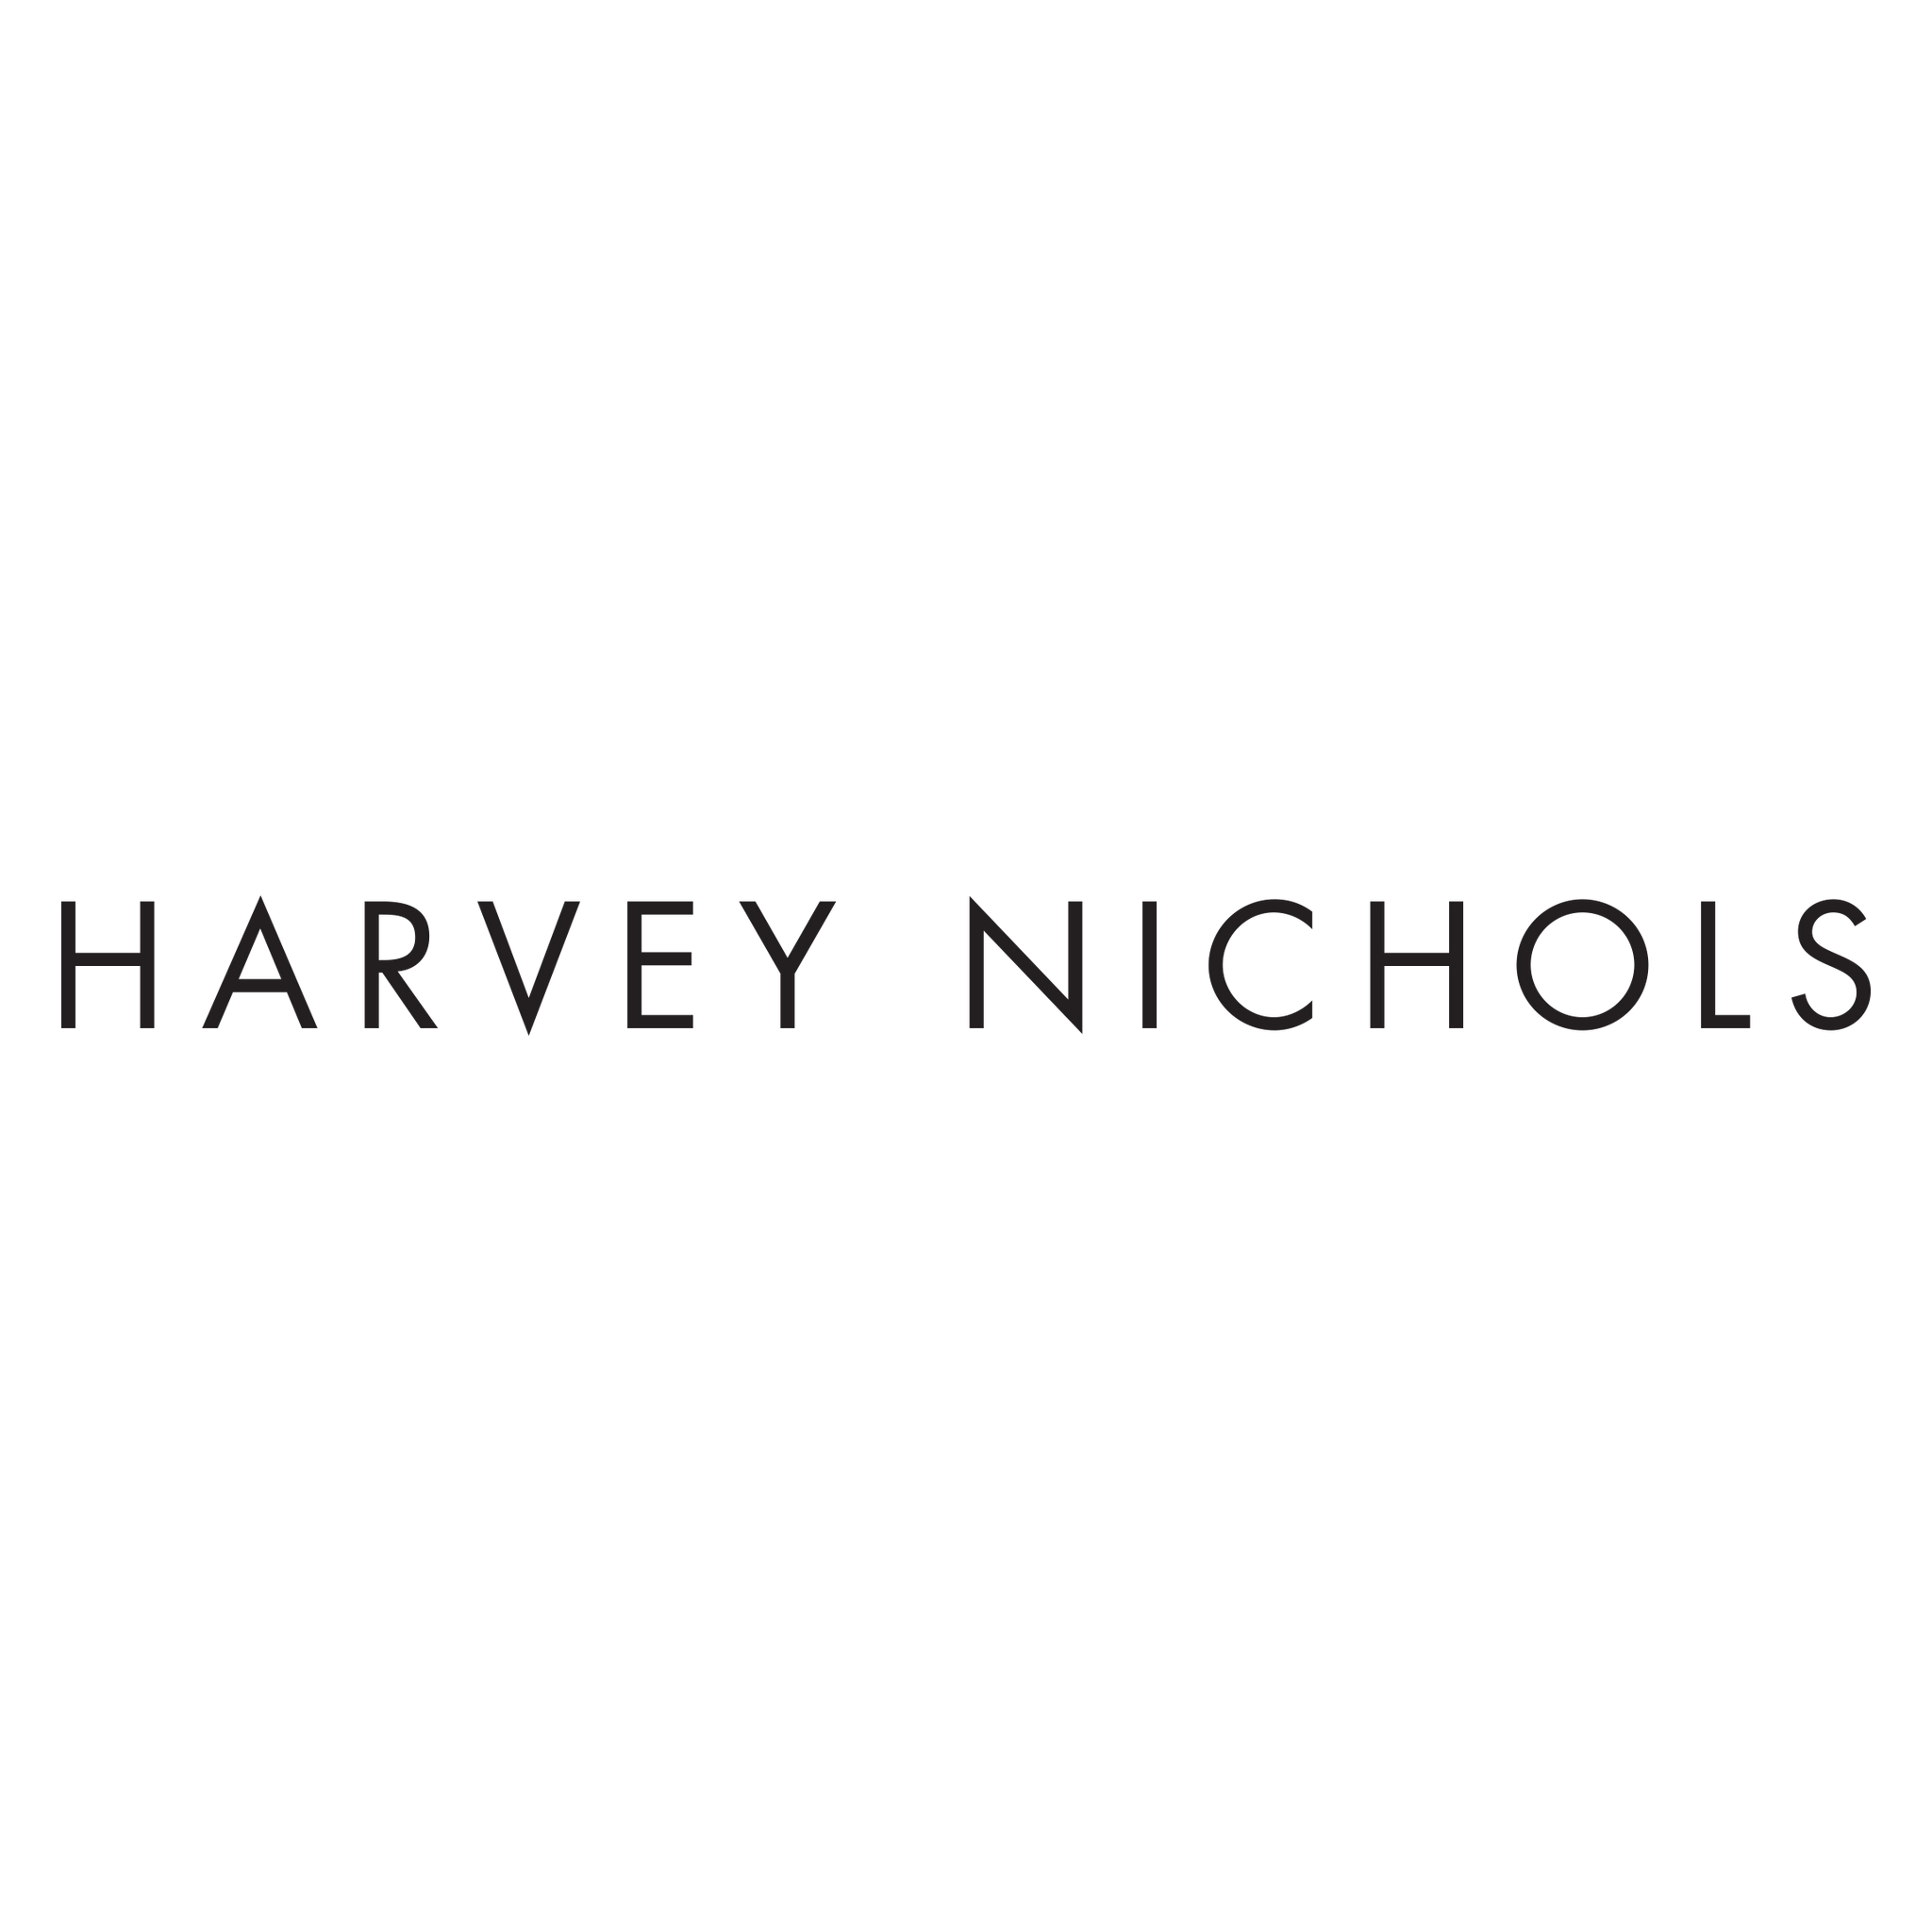 We partnered with Harvey Nichols for corporate gifts